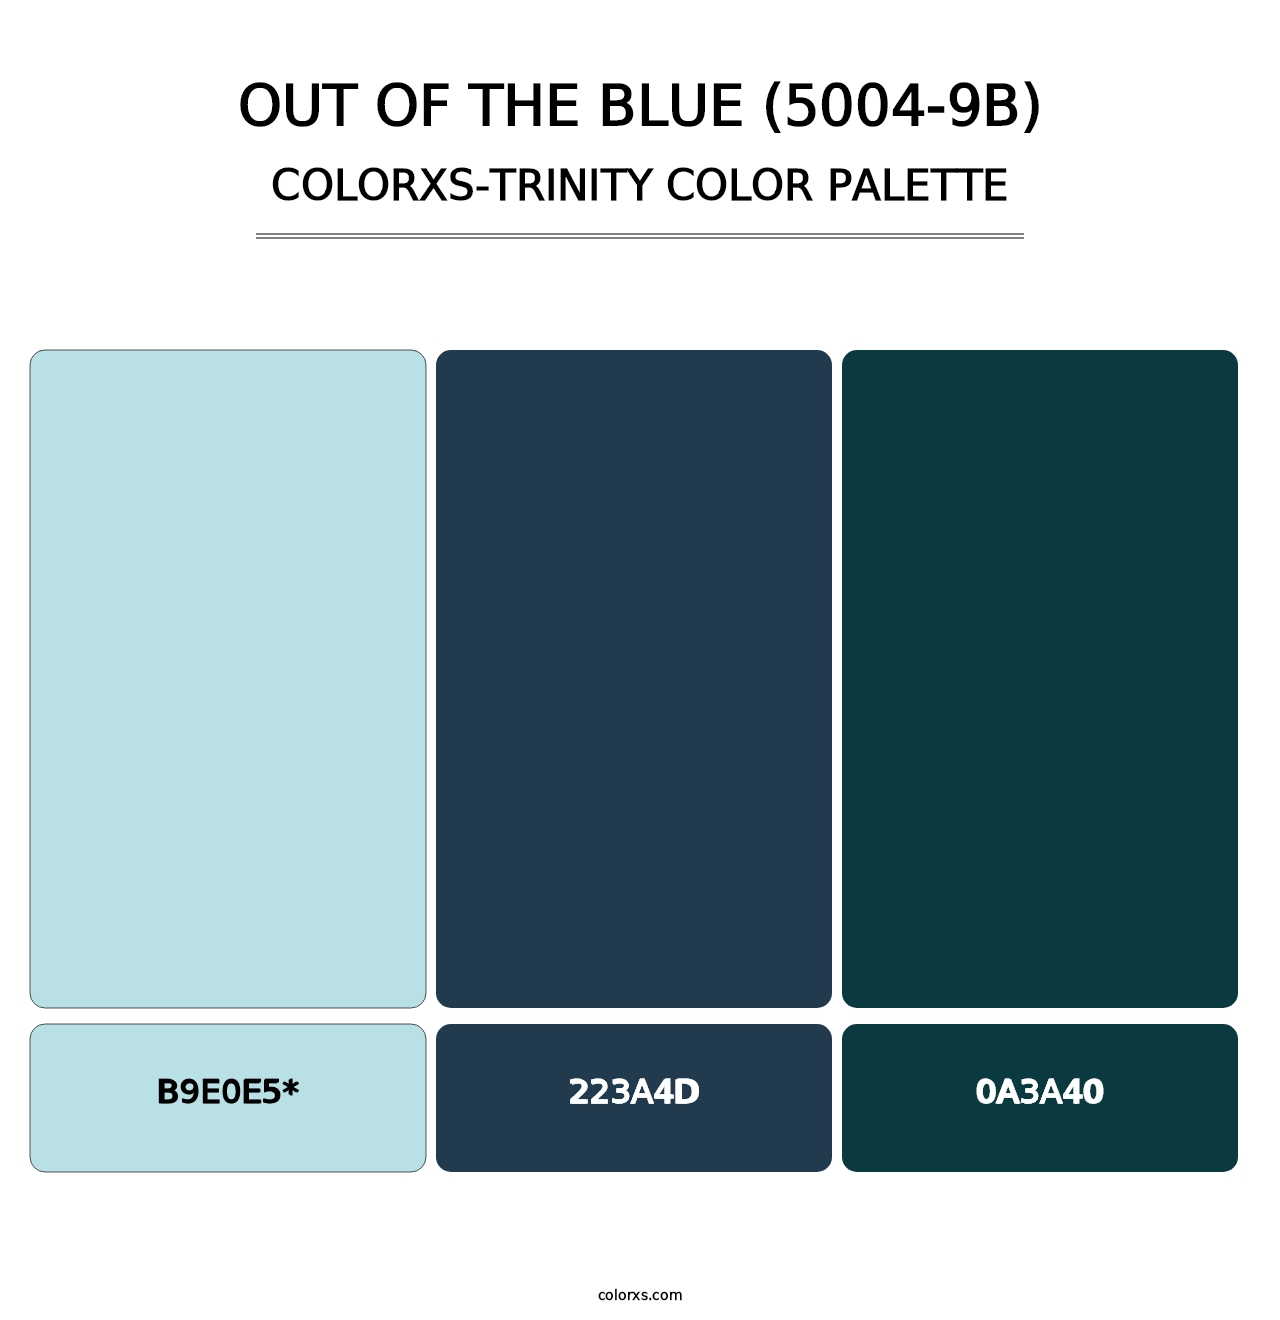 Out of the Blue (5004-9B) - Colorxs Trinity Palette